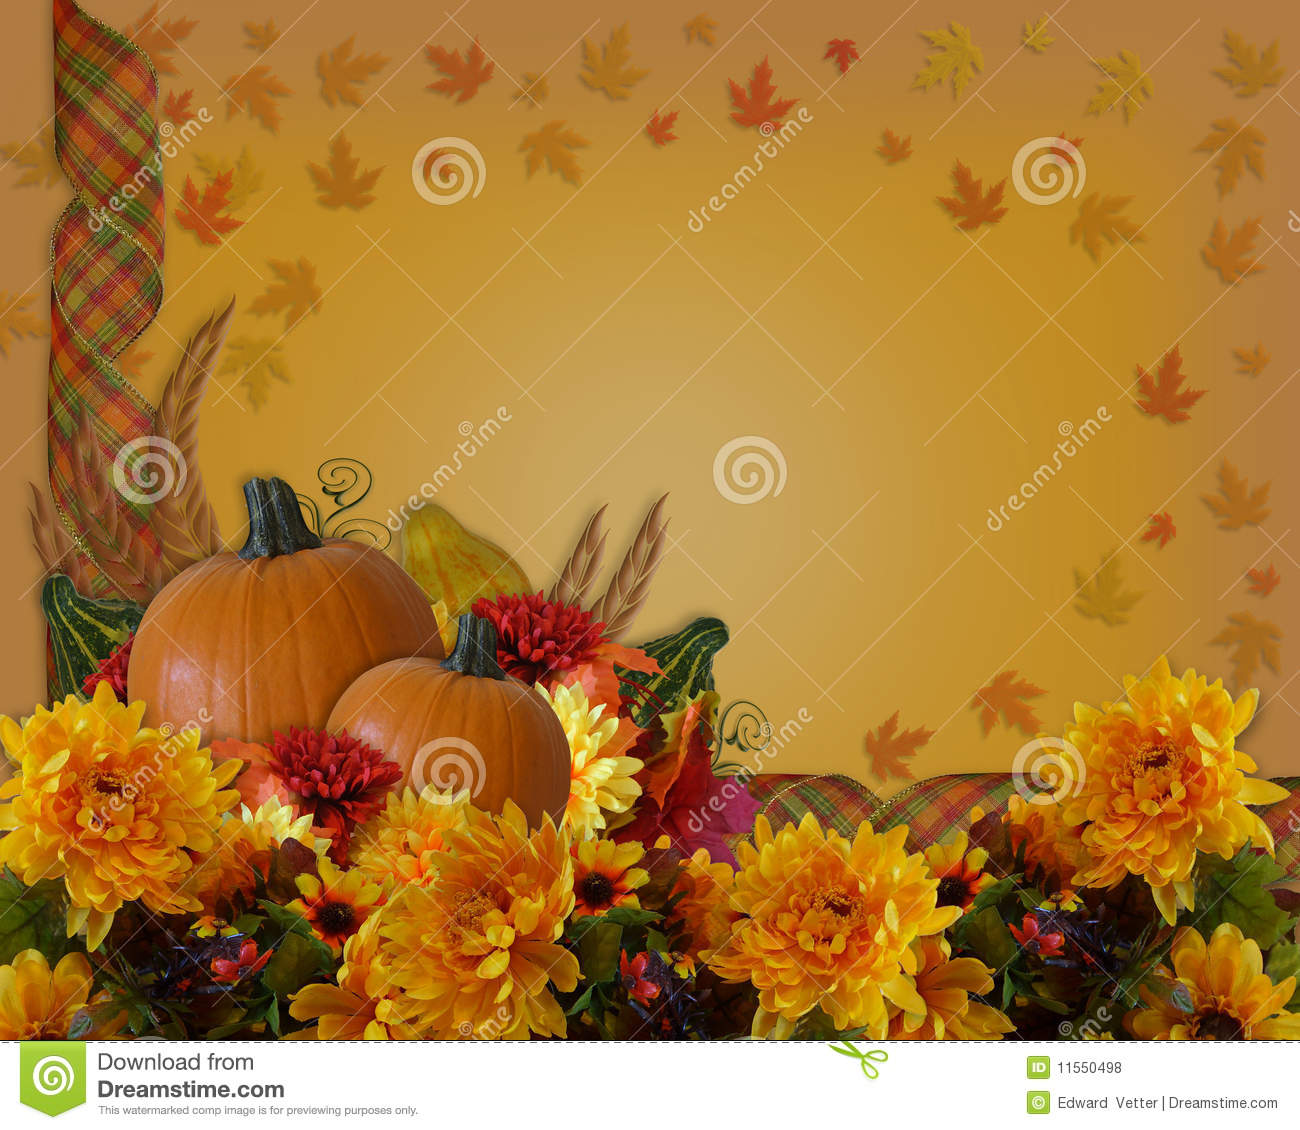 Thanksgiving Invitation Border Or Background With Leaves Pumpkins